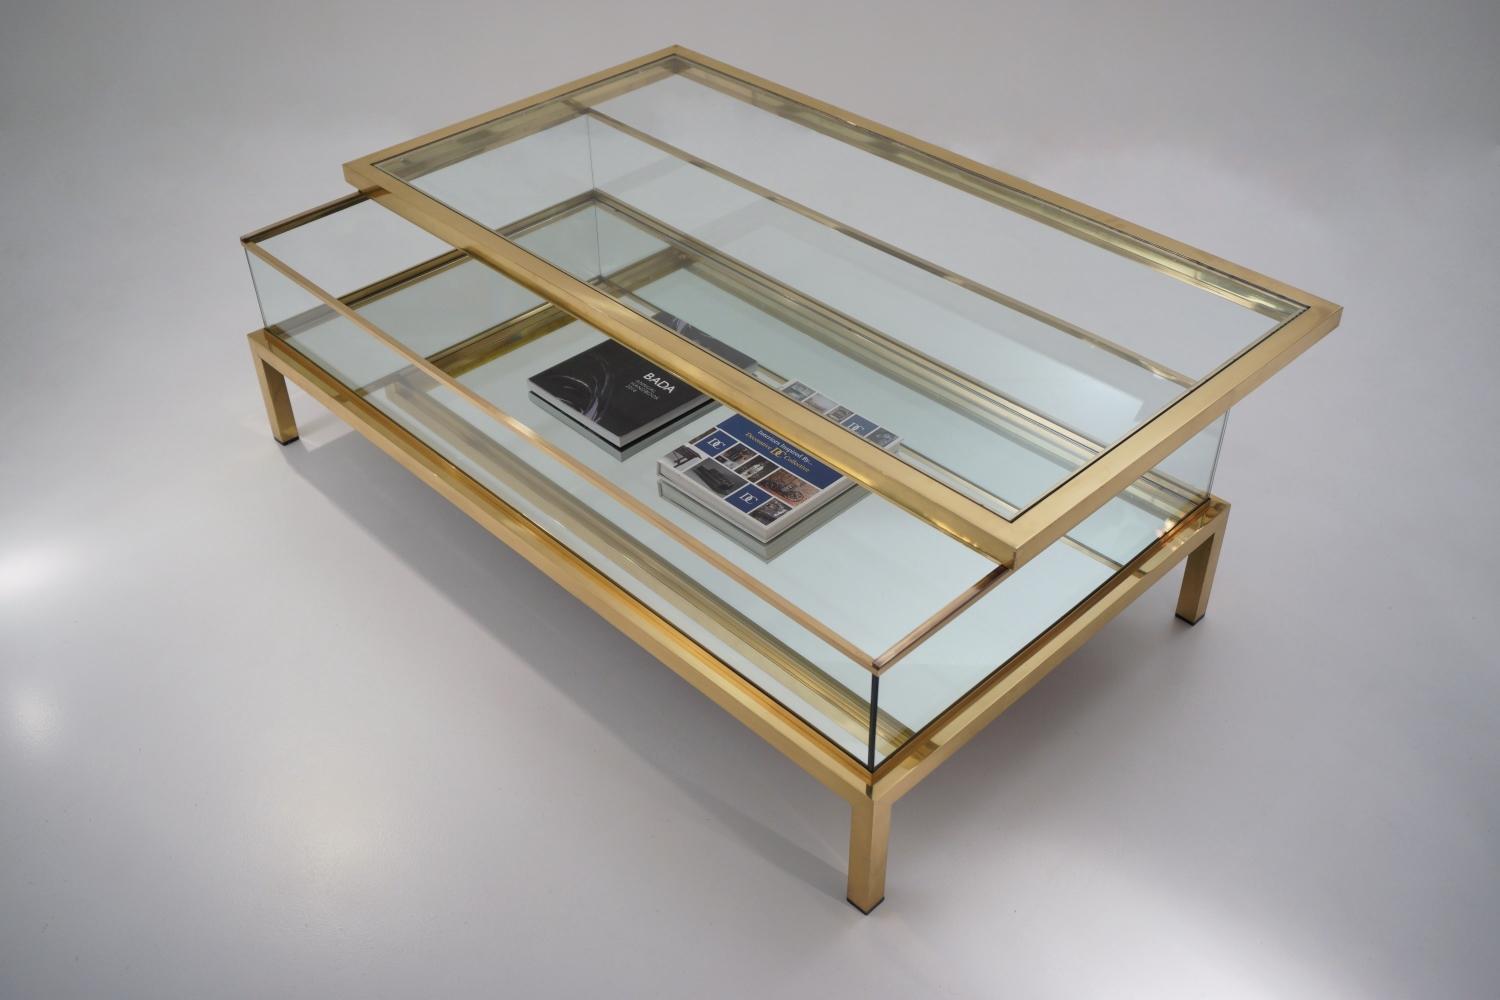 Maison Jansen brass two tier sliding top display coffee table, with mirrored enclosed shelf, 1970`s ca, French.

This coffee table has been gently cleaned while respecting the vintage patina and is ready to use.

The Neoclassical & Modernist